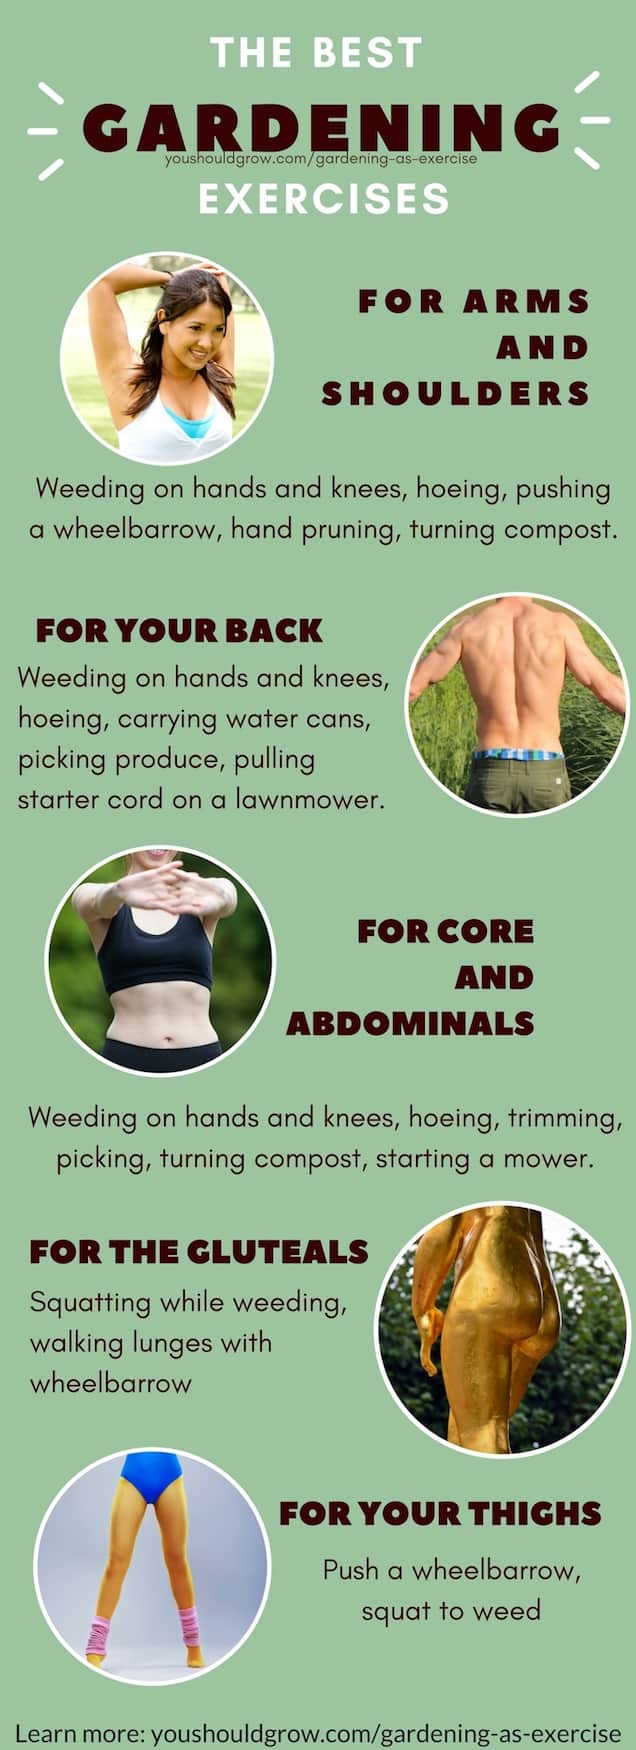 Getting exercise in the garden. The best gardening exercises for arm, back, core, thighs, butt